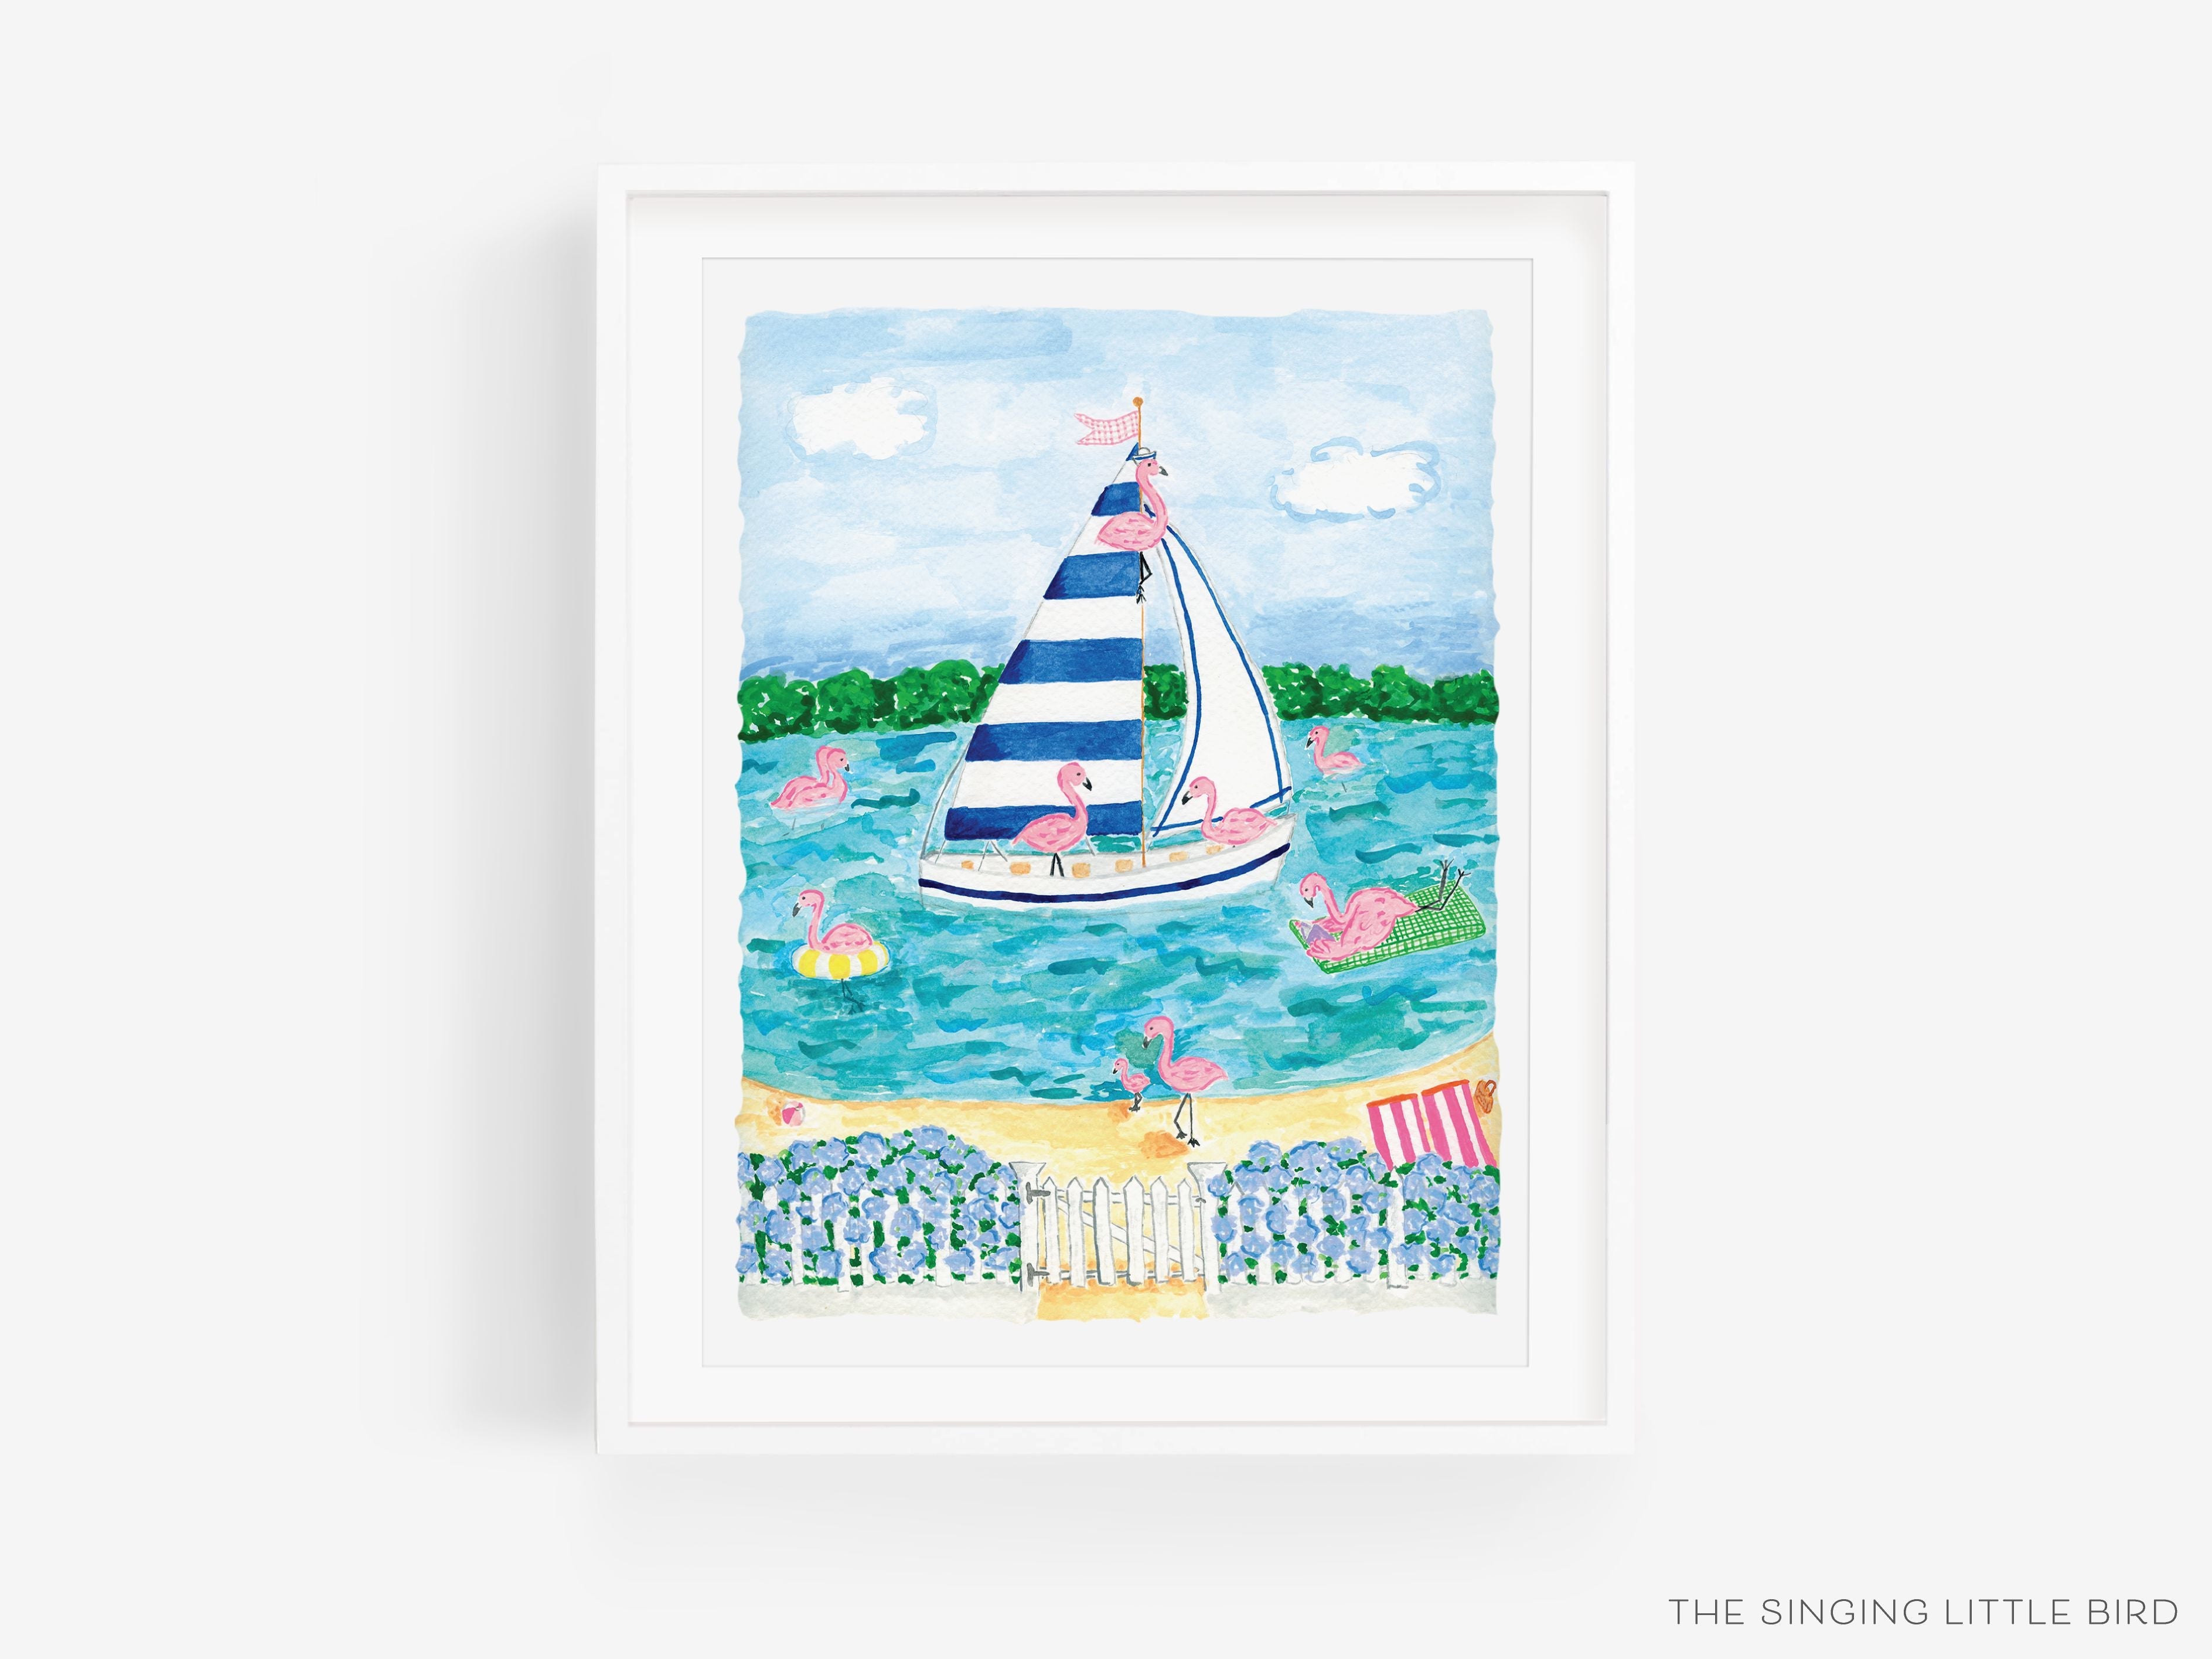 Flamingo Lake Art Print-This watercolor art print features our hand-painted Flamingo Lake Scene, printed in the USA on 120lb high quality art paper. This makes a great gift or wall decor for the shore lover in your life.-The Singing Little Bird